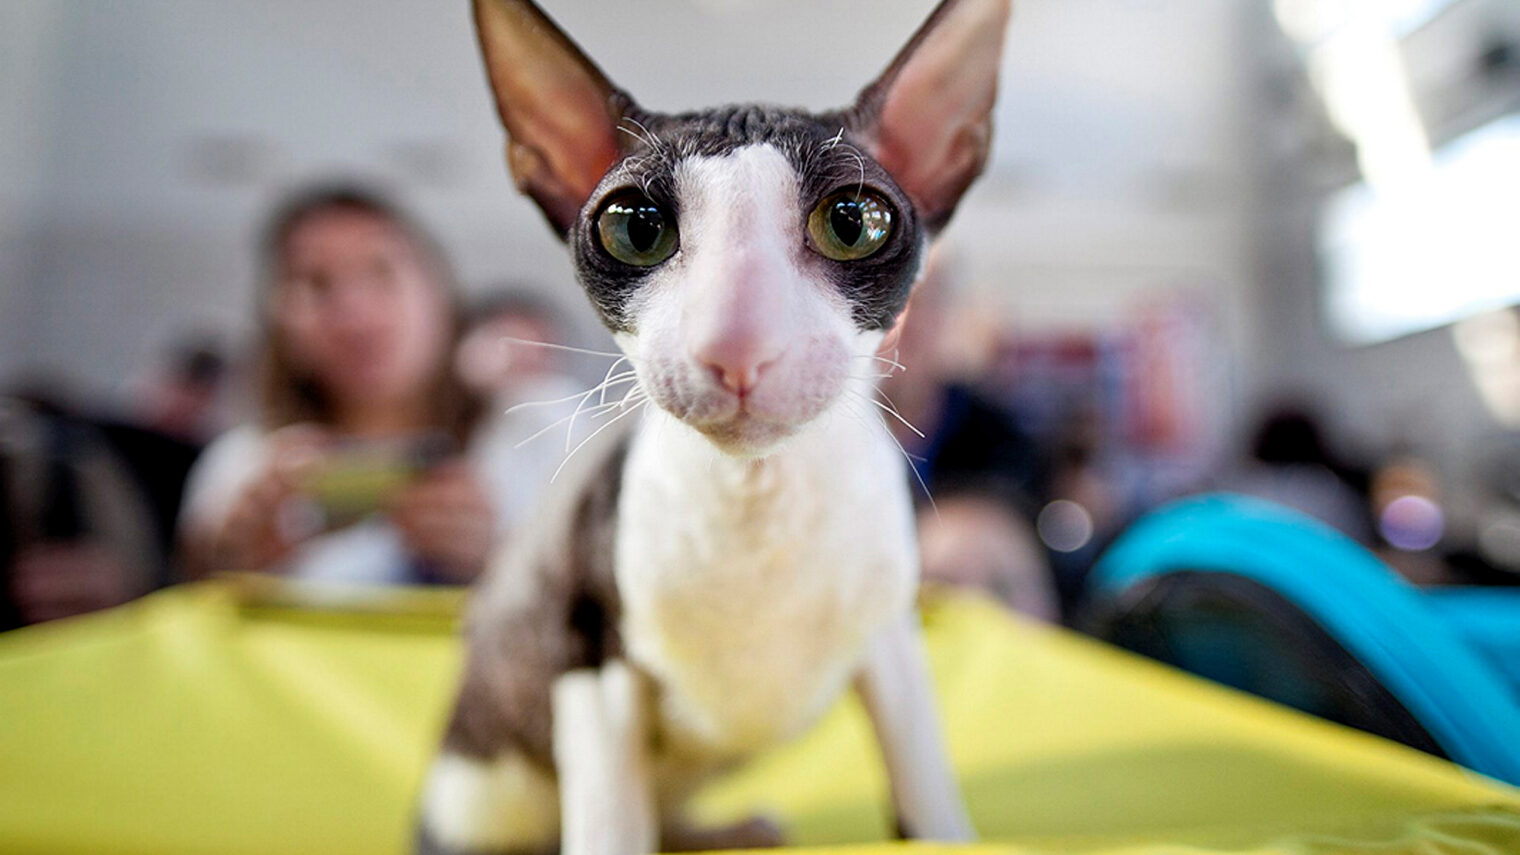 One of the cats competing in the Royal International Exhibition held in Holon. Photo by Dima Vazinovich/FLASH90